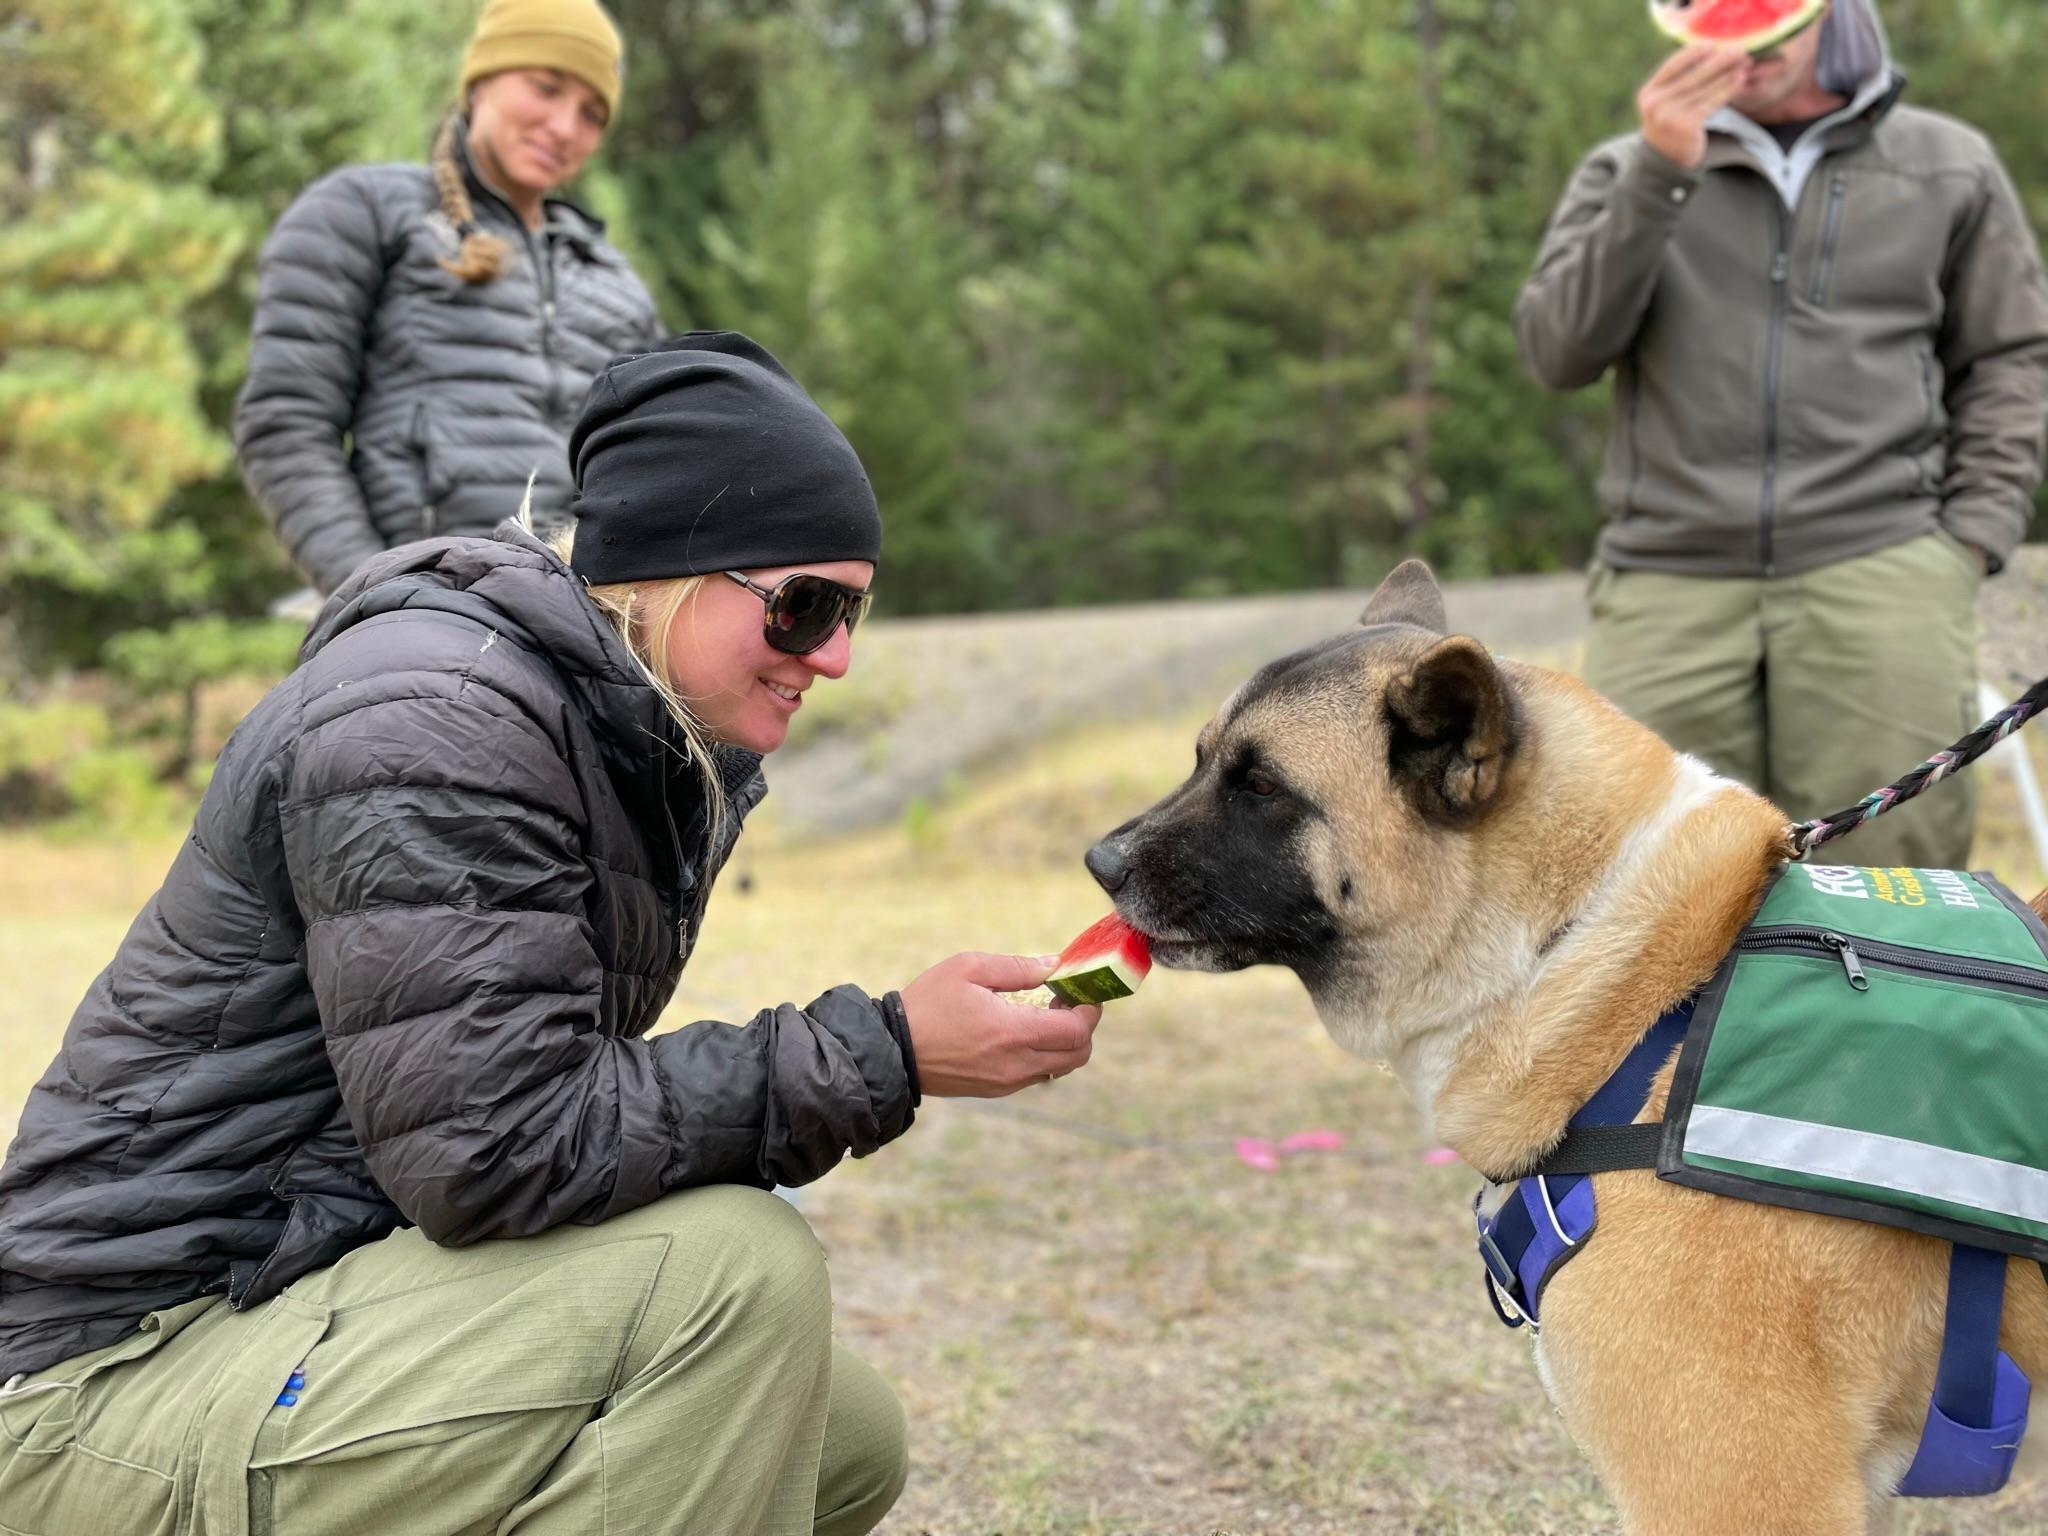 A firefighter snacking on some watermelon offers a bite to an Akita named Hadassah. She is standing staring down the watermelon in a grass field.